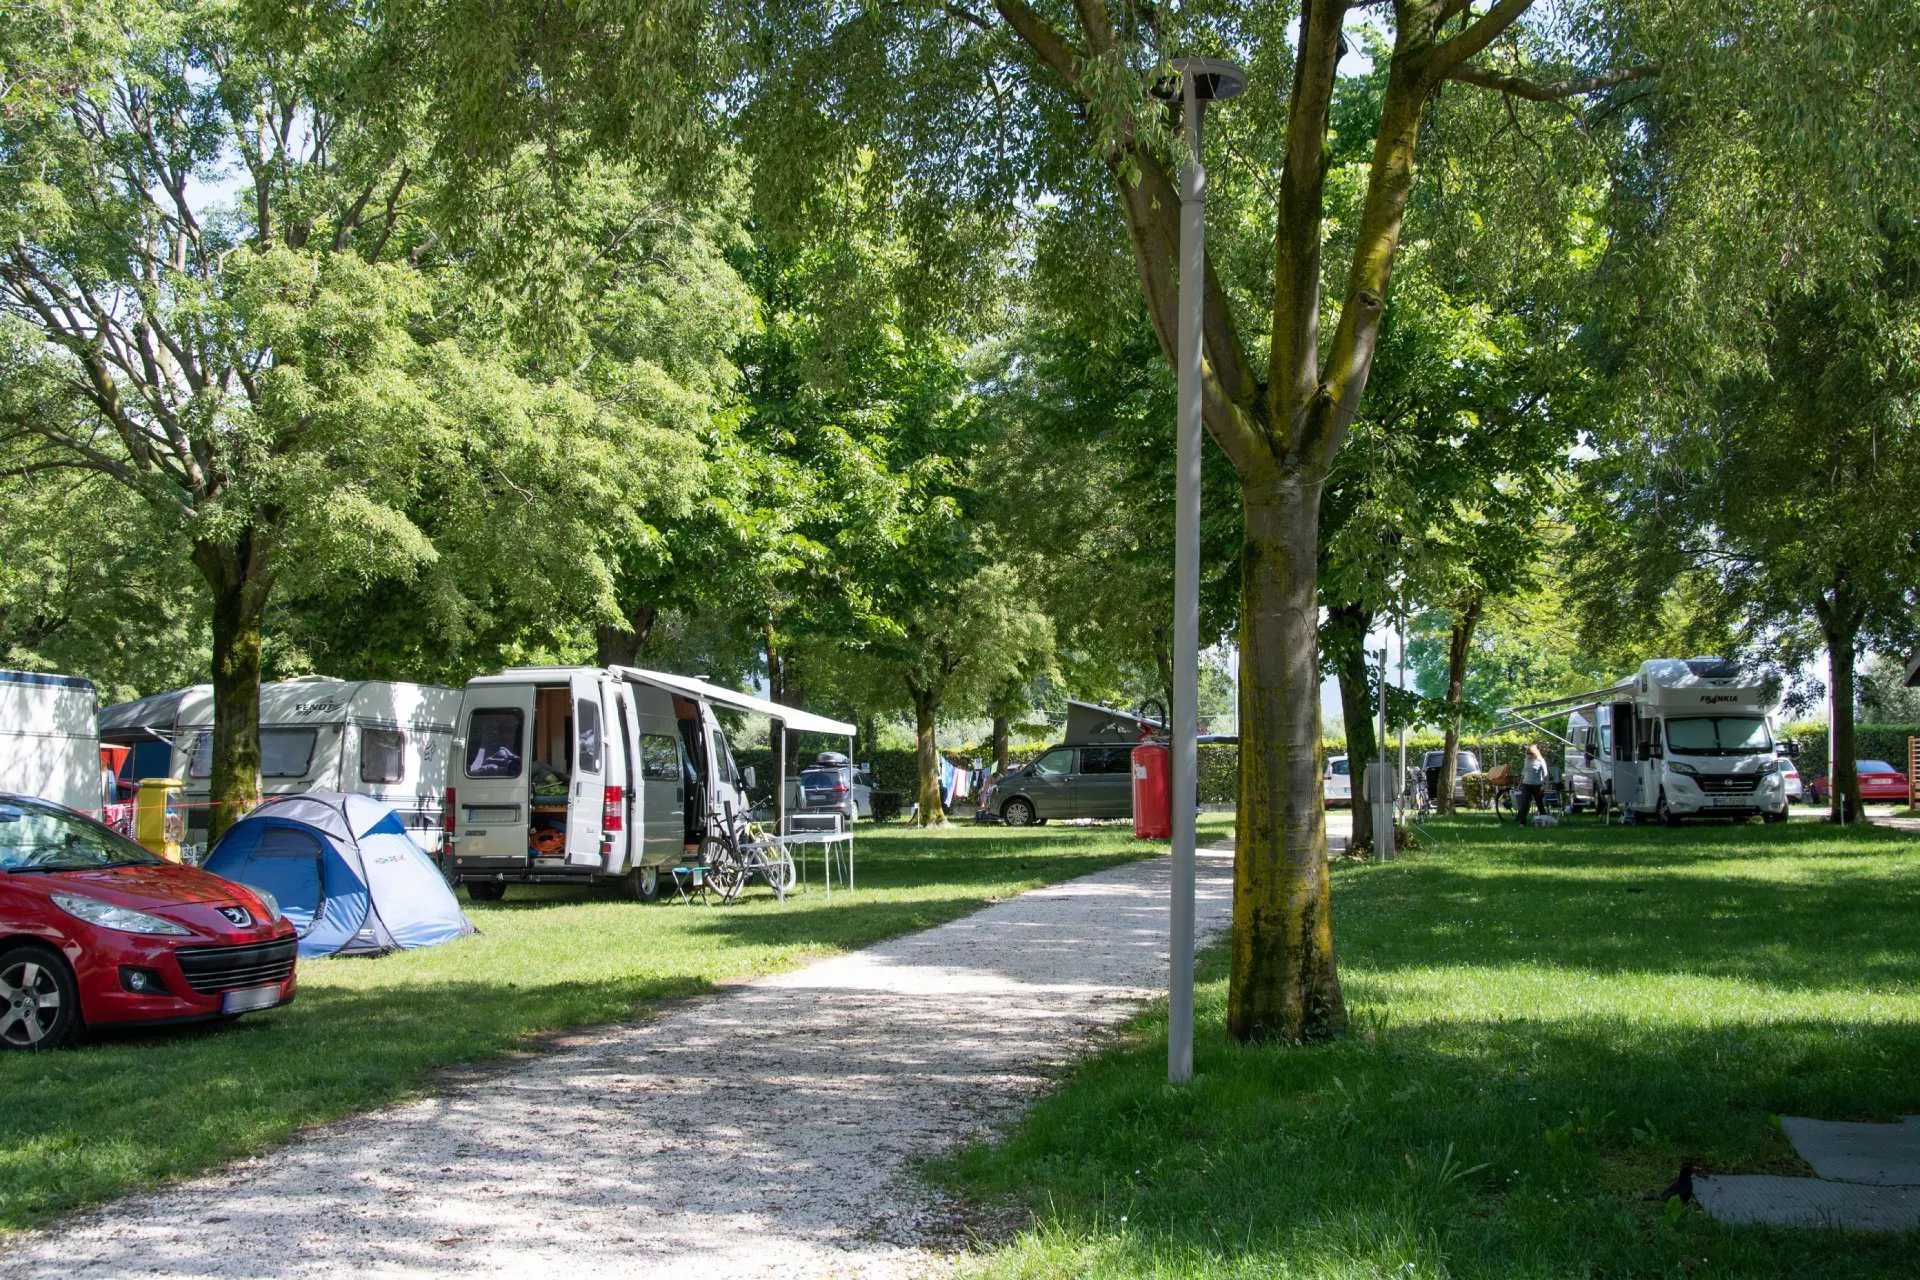 Camping Fornella in Italy, Europe | Campsites - Rated 4.9